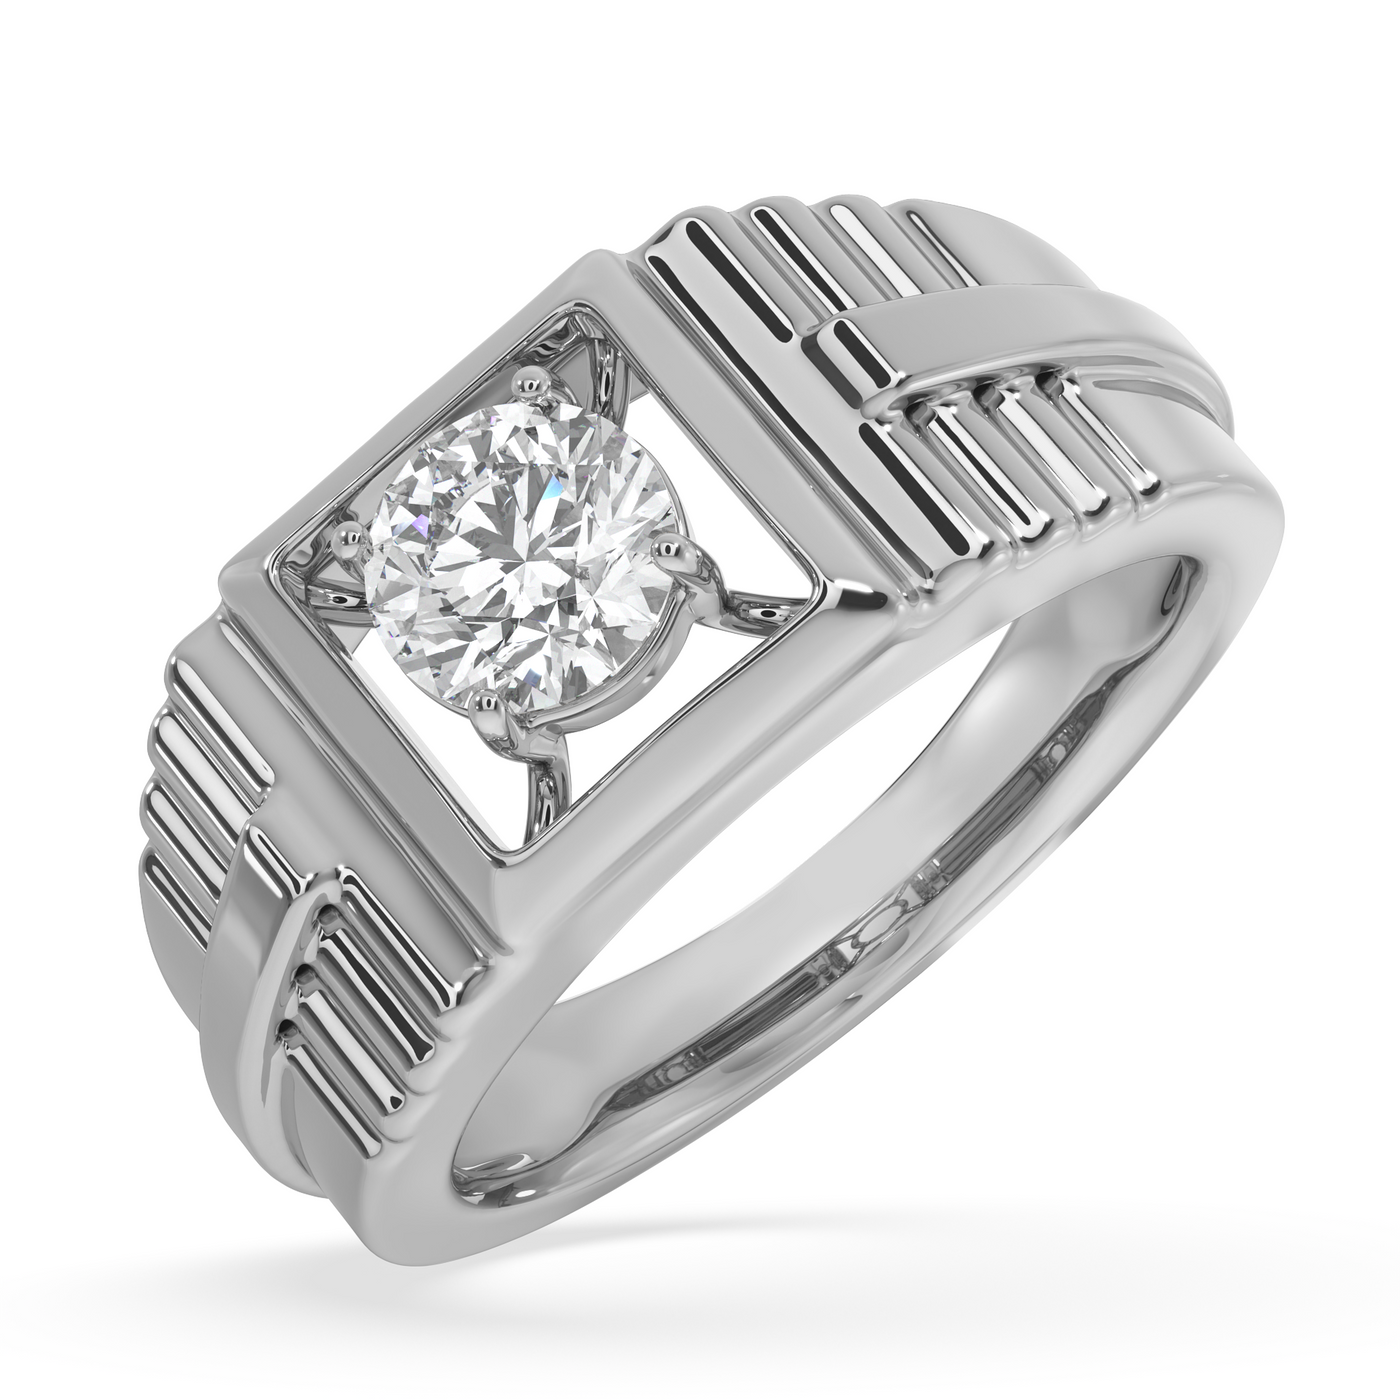 SY Women's Ring in Platinum, Prong Solitaire Ring